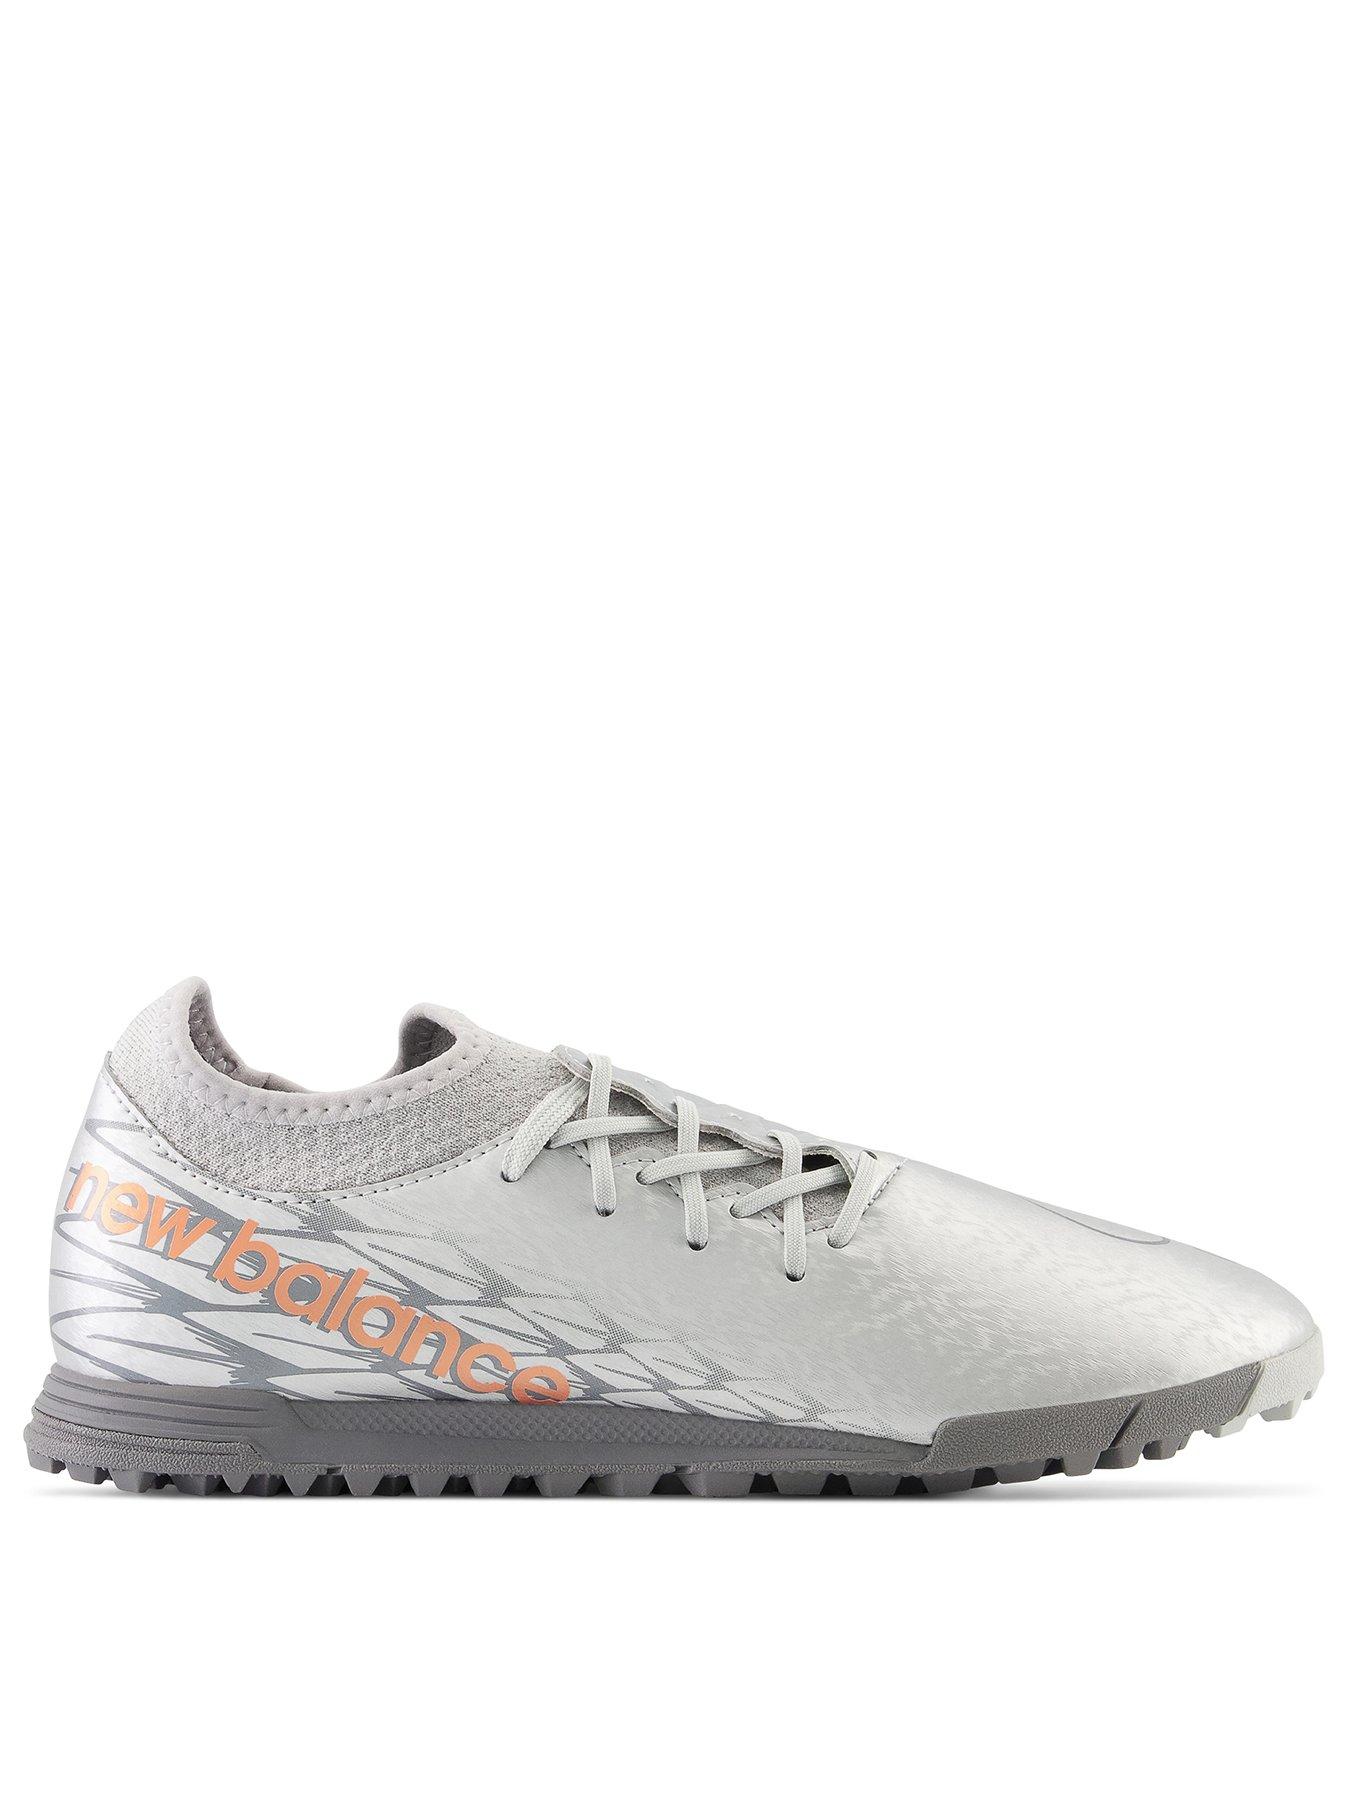 New Balance Mens Furon Dispatch Astro Turf Football Boots - Silver